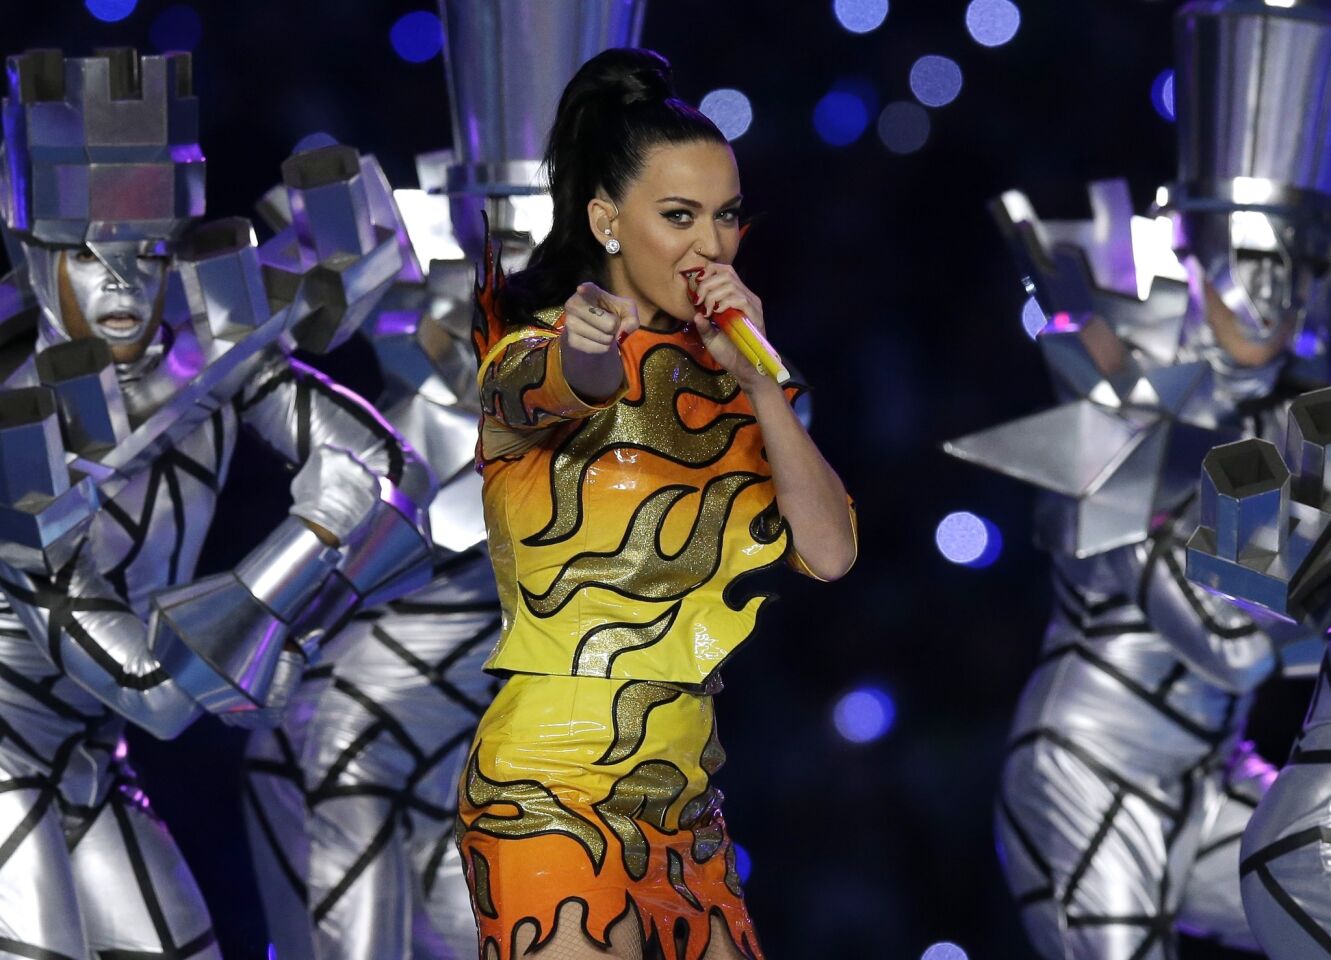 Katy Perry (nominated this year for pop vocal album and pop duo/group performance) will perform "By the Grace of God" during the Grammys ceremony.